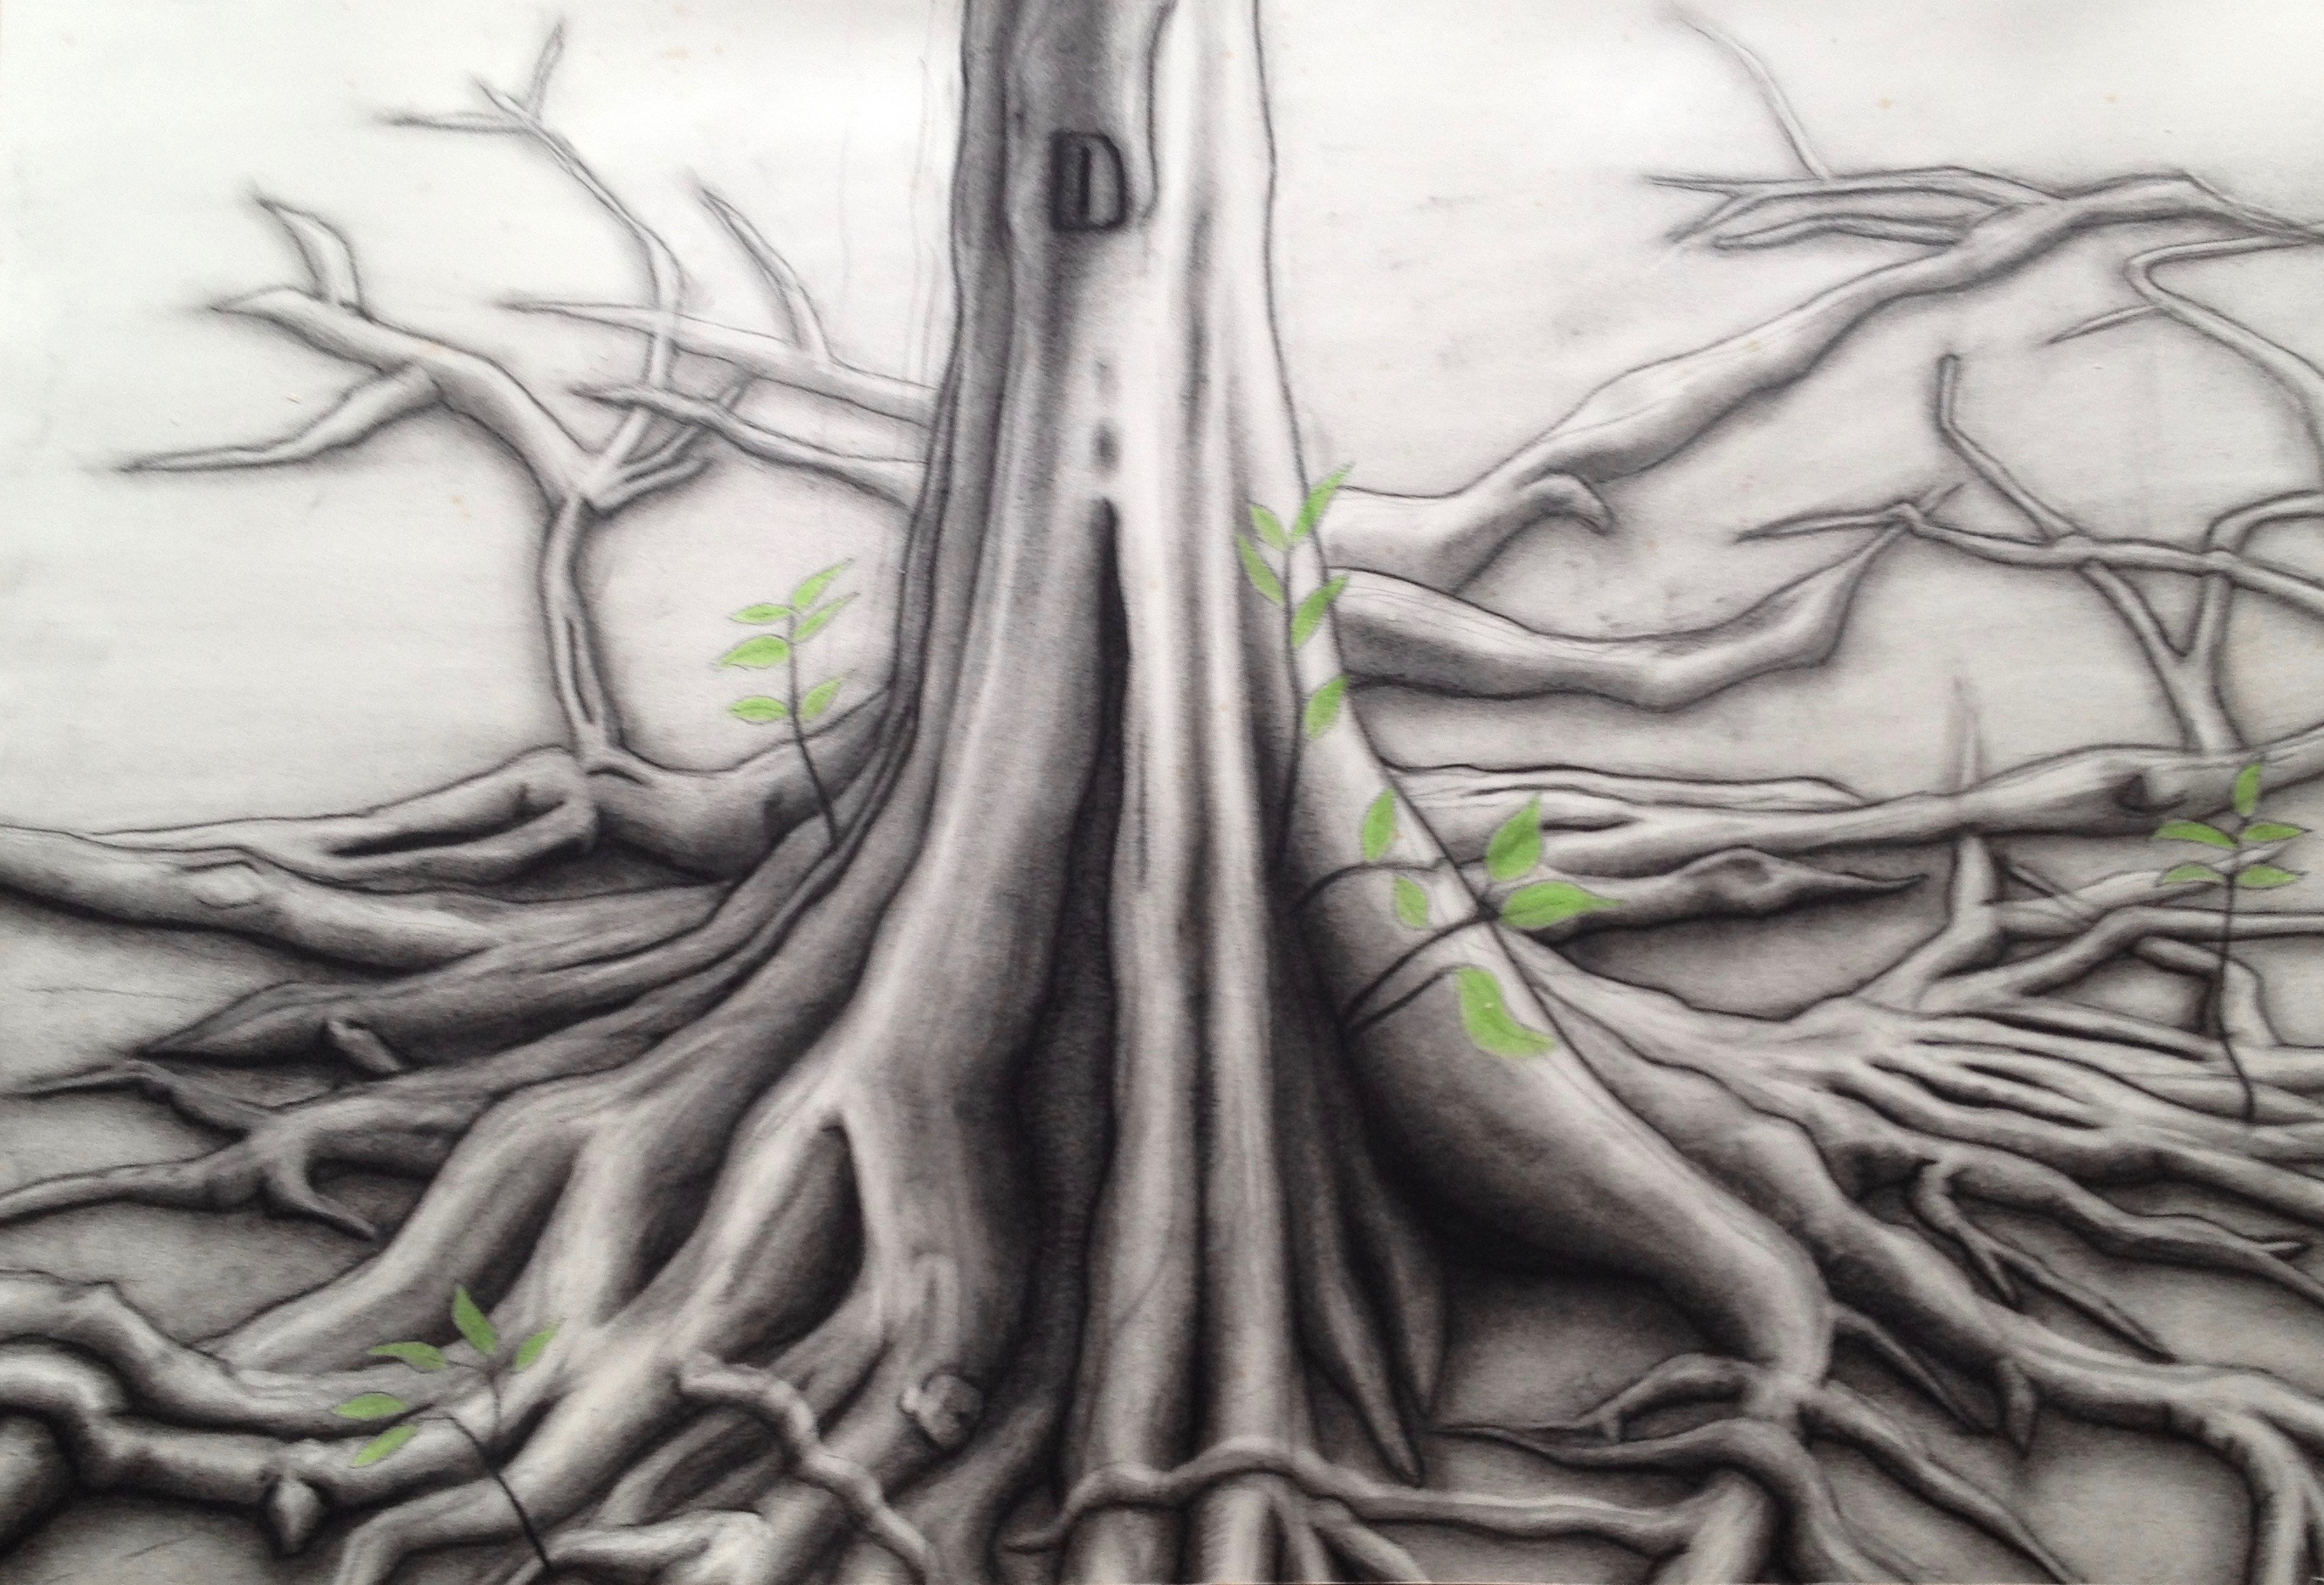 Show Your Roots (Original Charcoal Drawing), Charcoal and Pastel on Fabriano Paper, 95 x 70 cm, 2007 by David Lloyd